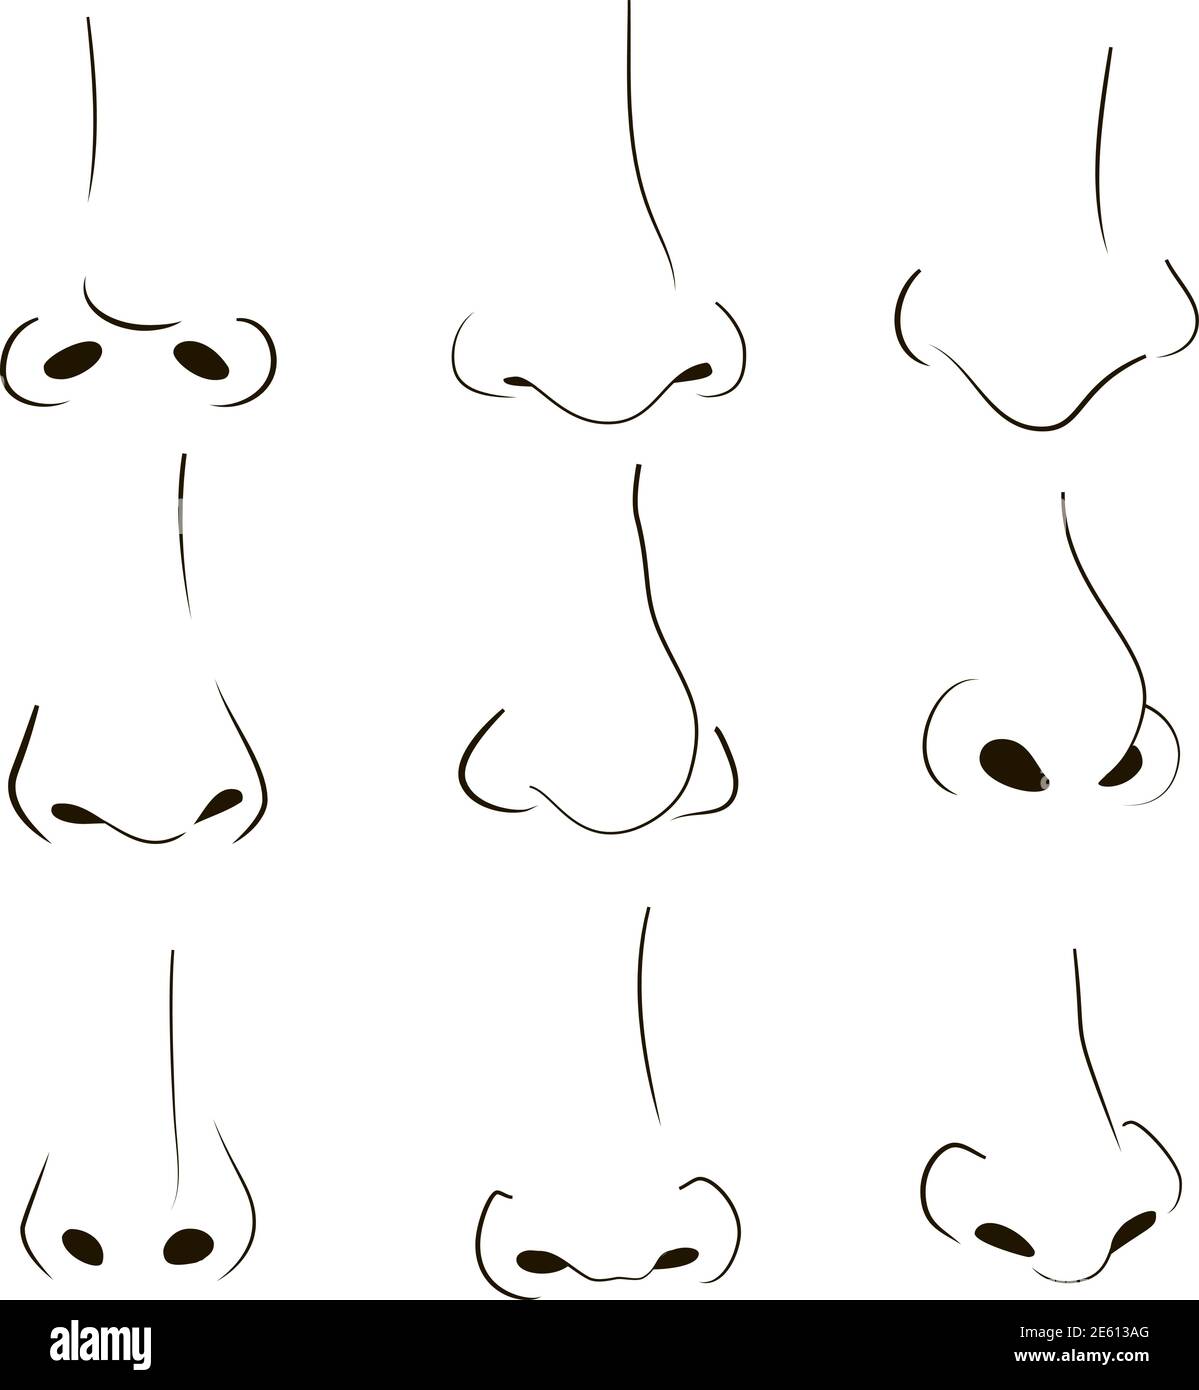 Haris's 6 Step Nose Drawing Tutorial - Art Resources - Episode Forums